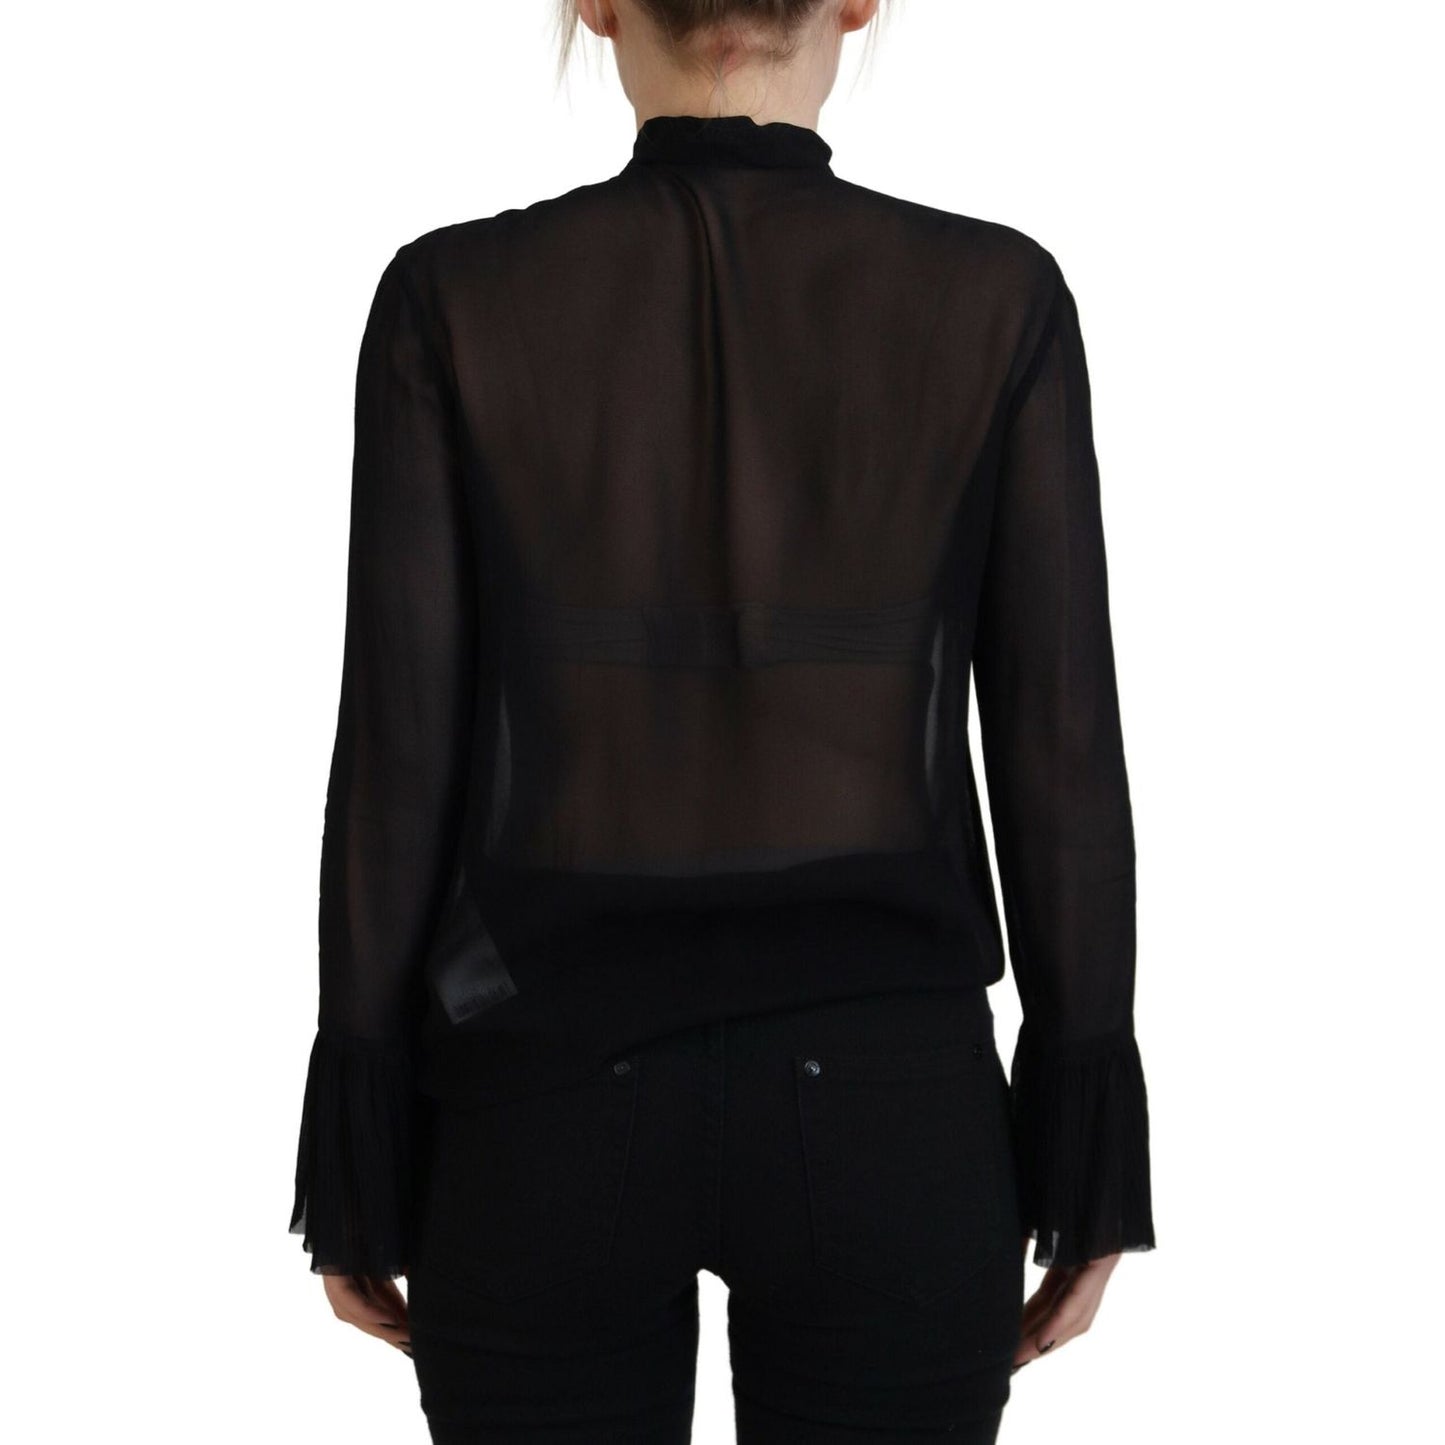 Dsquared² Black Viscose Long Sleeves See Through Blouse Top black-viscose-long-sleeves-see-through-blouse-top